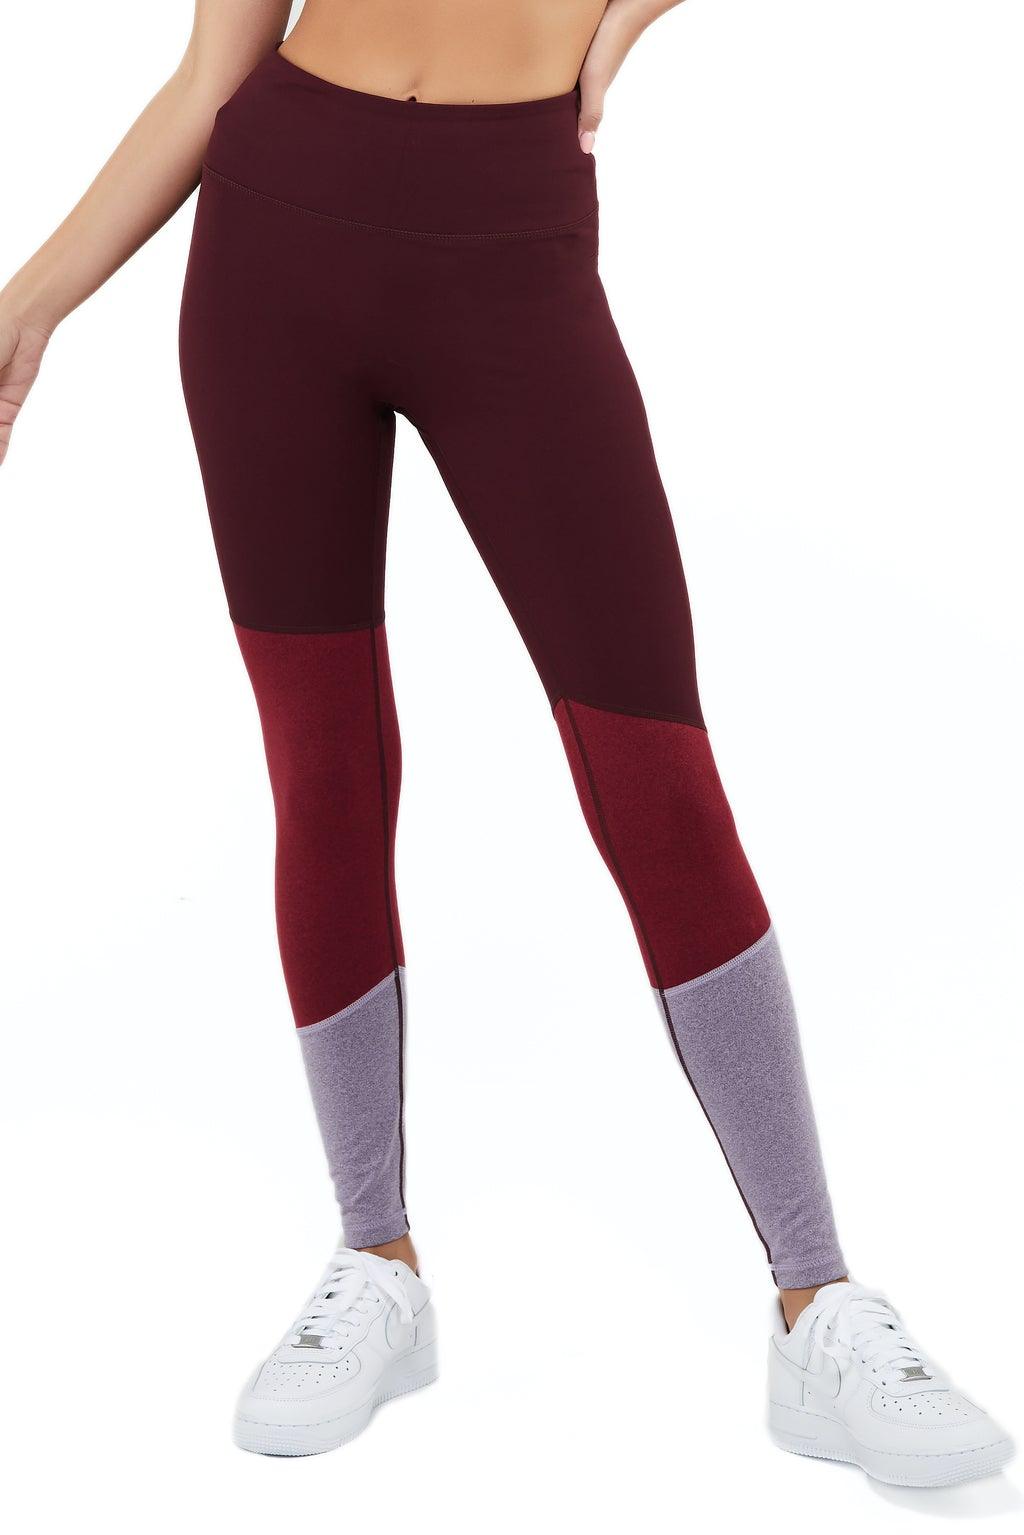 Soho Sport Activewear | Best Yoga Apparel and Outfits for Ladies ...